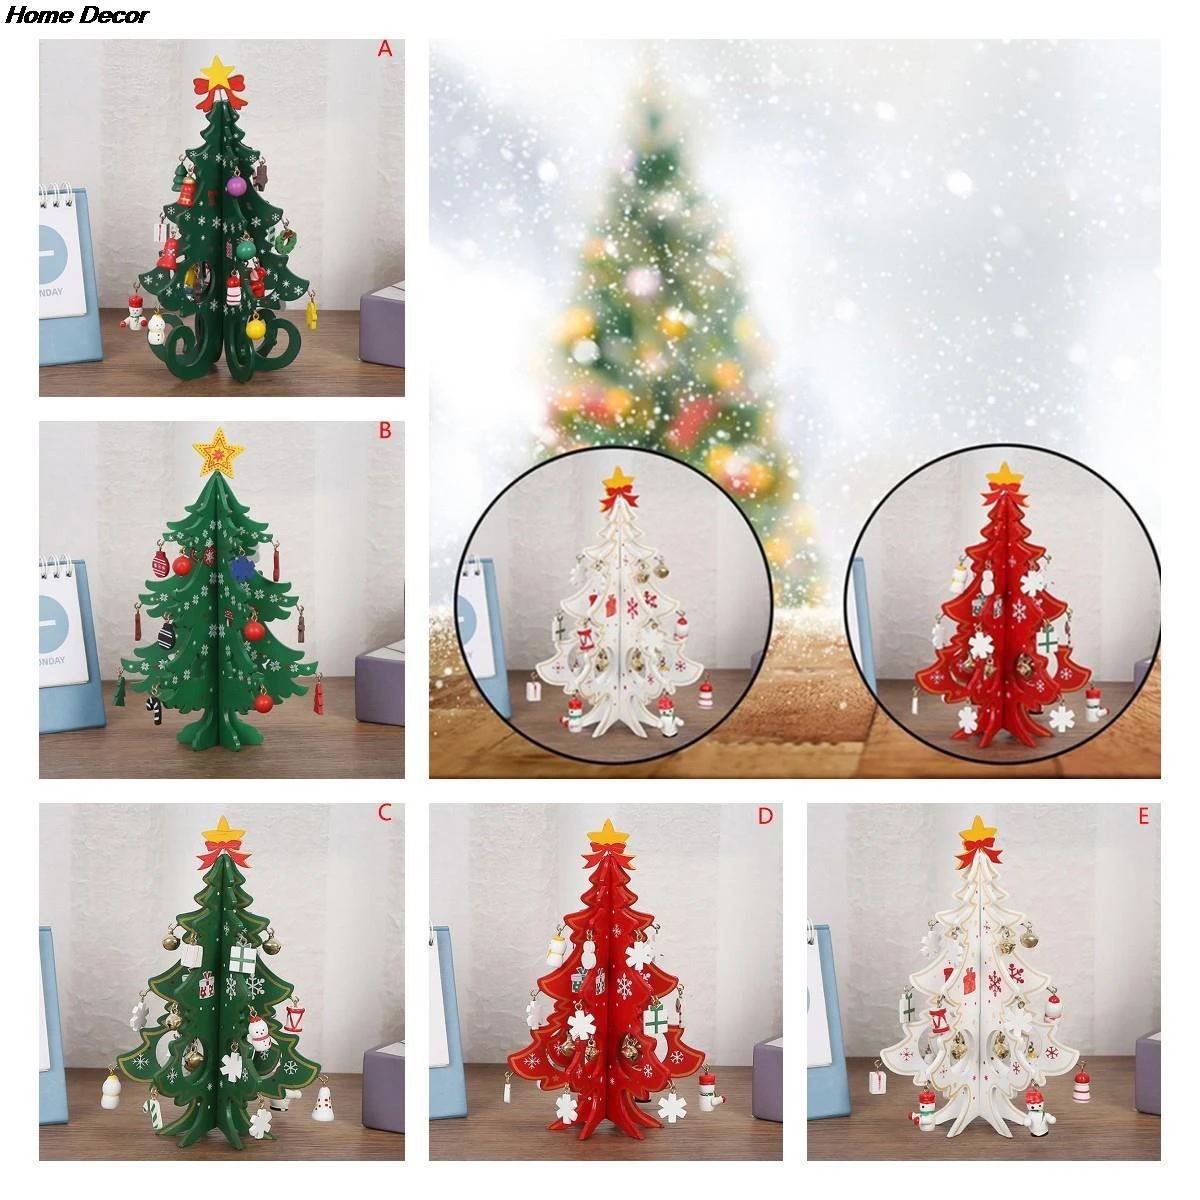 Handmade Stereo Wooden Christmas Tree White/Green/Gold Christmas Tree Children's Layout Christmas Decorations Ornaments